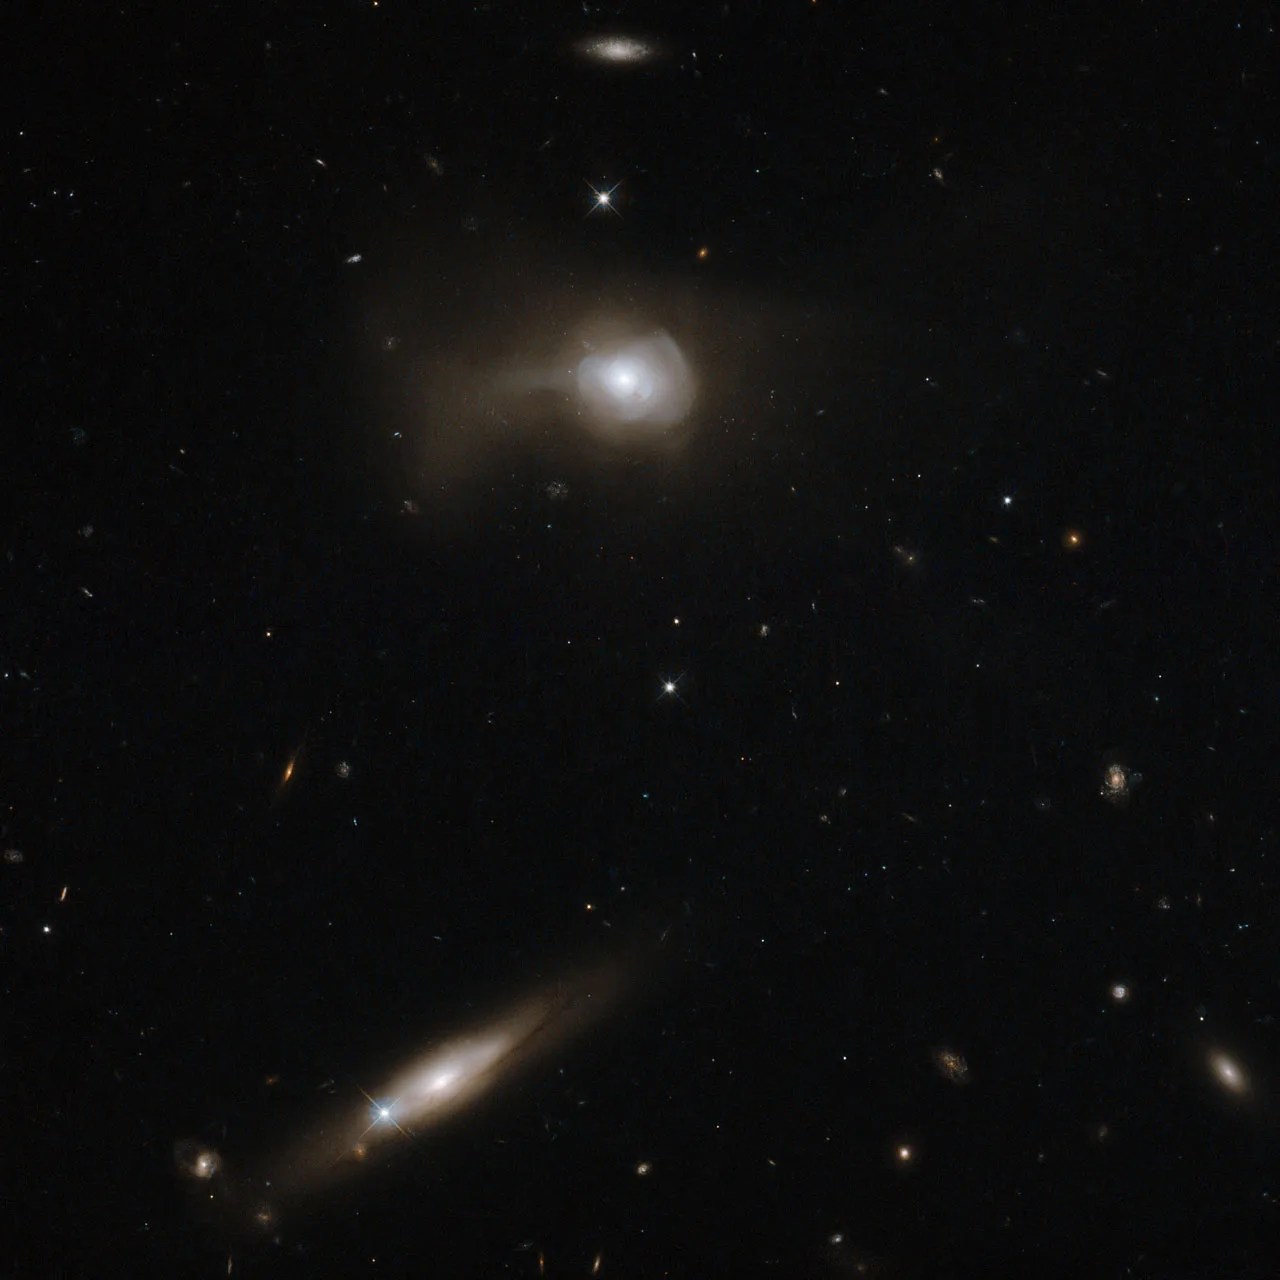 Markarian 779 has a distorted appearance because it is likely the product of a recent galactic merger between two spirals.